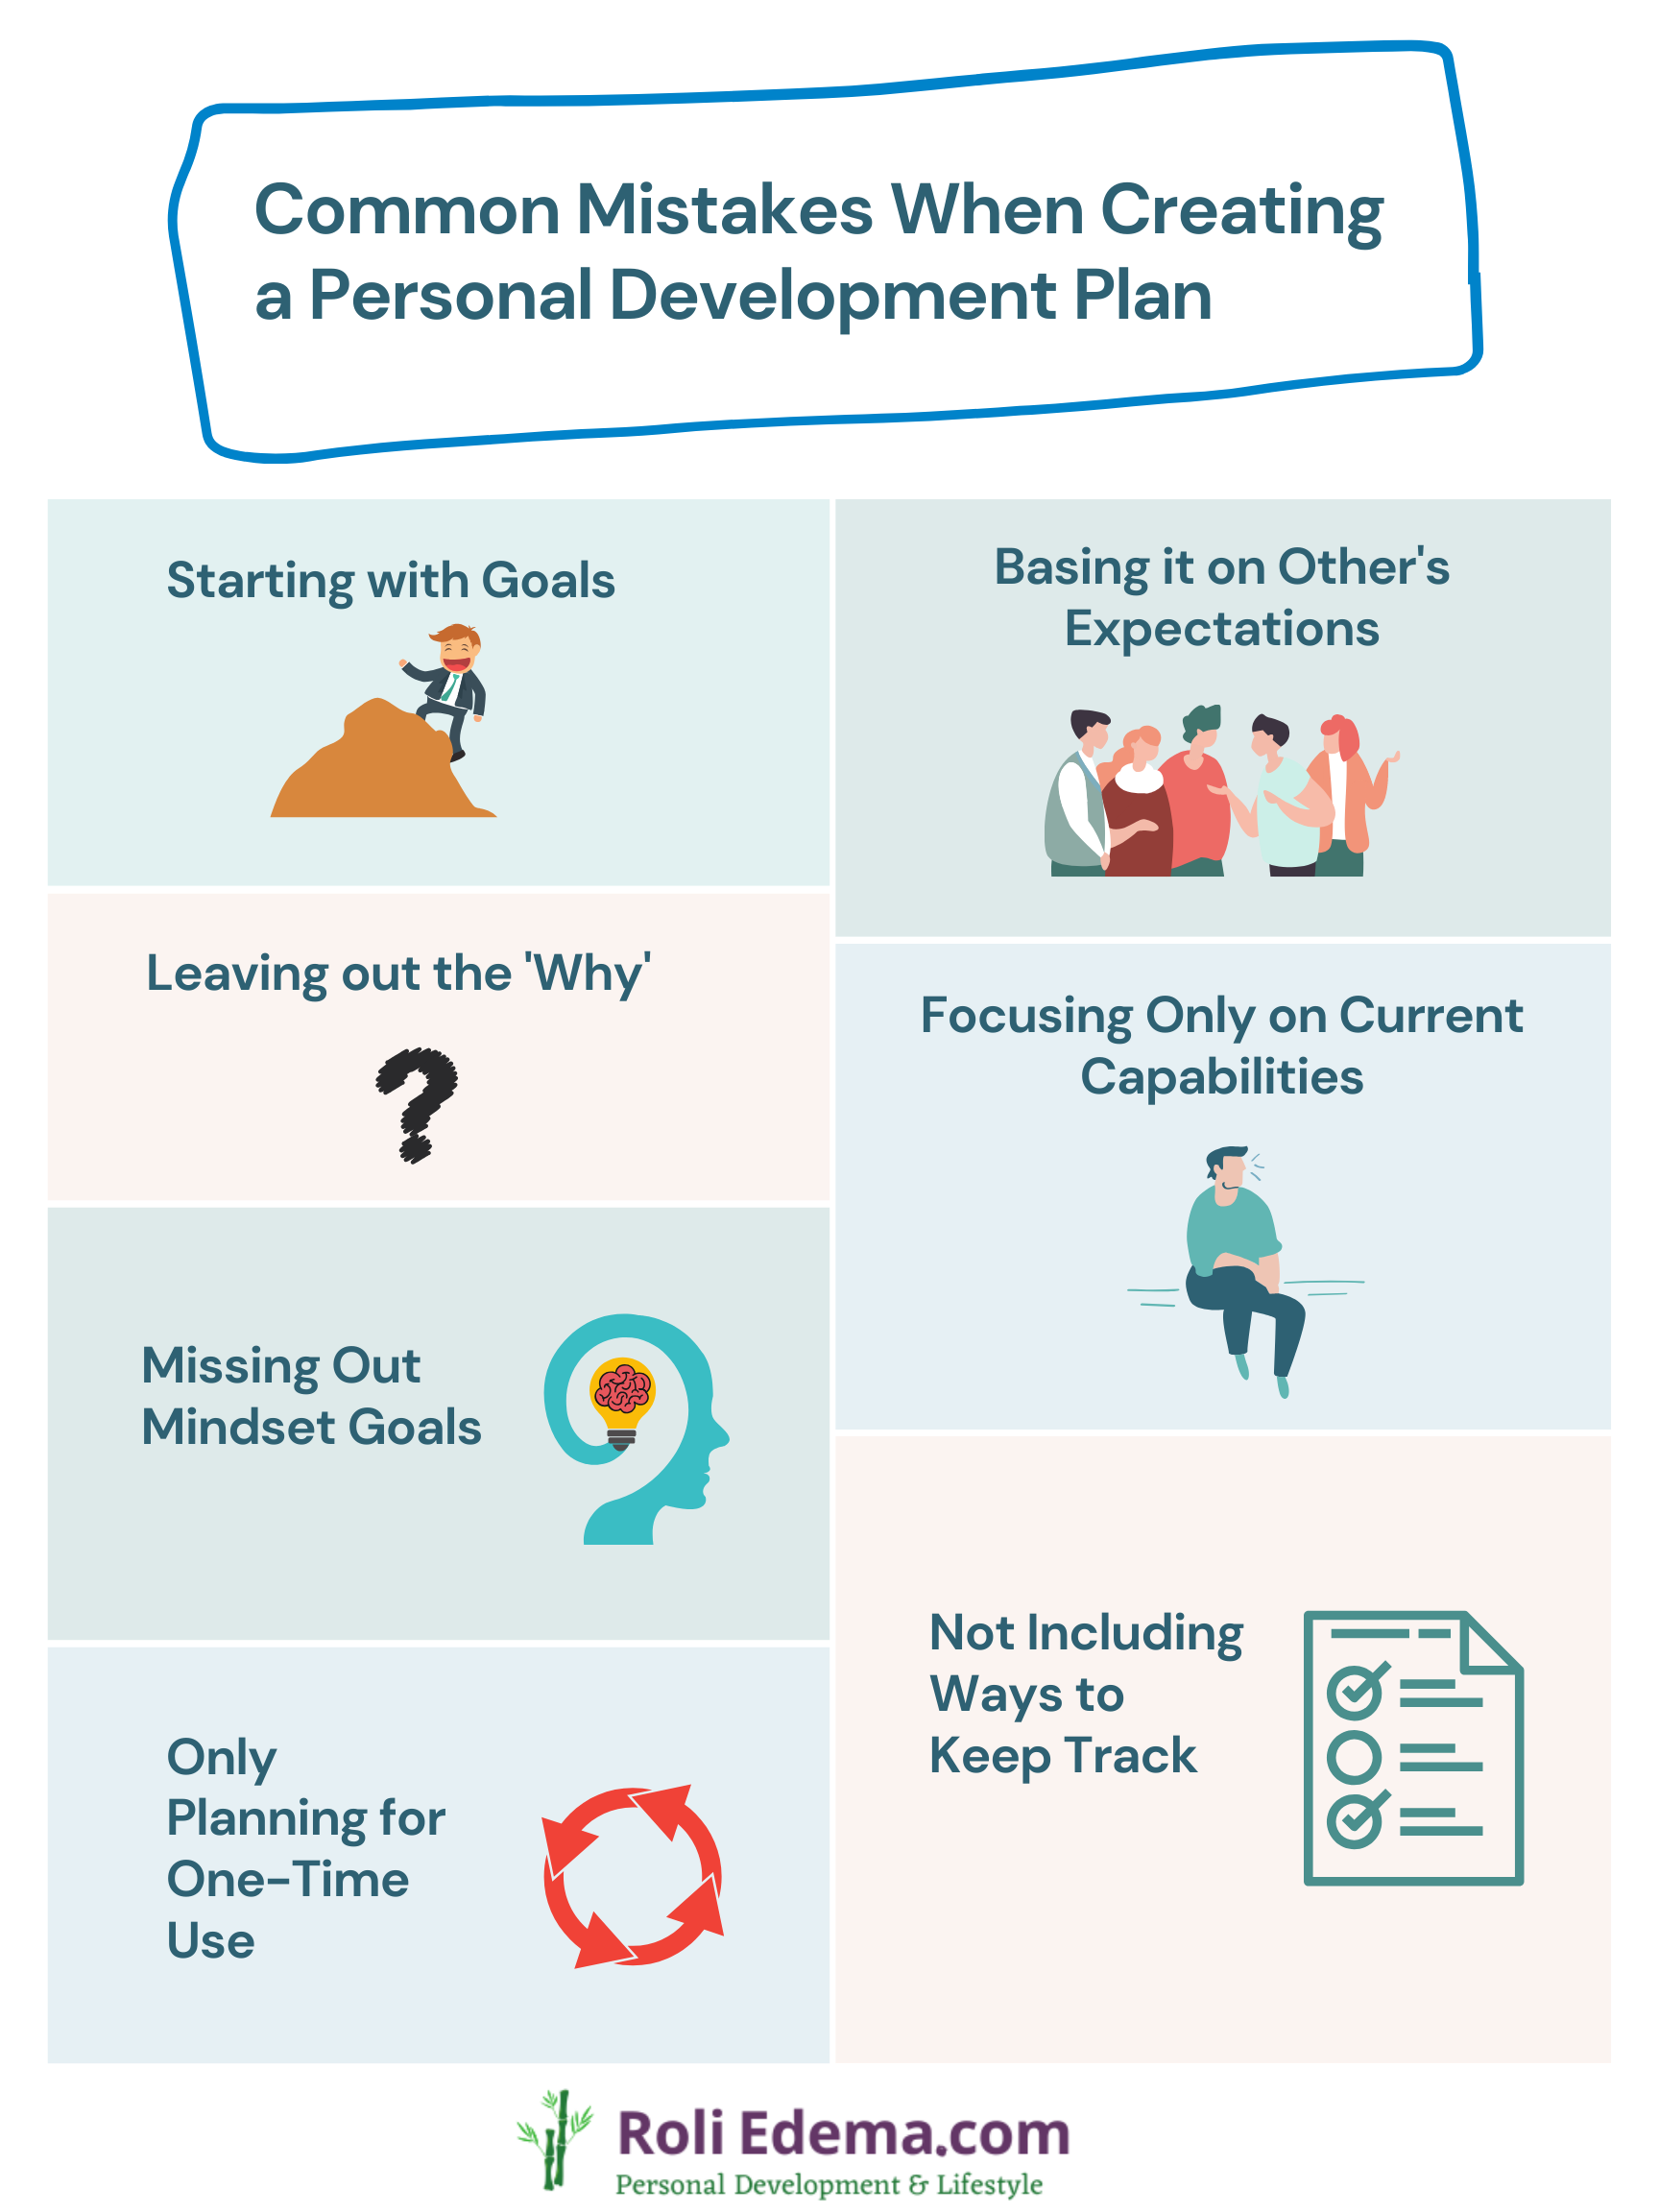 Common Mistakes When Creating a Personal Development Plan